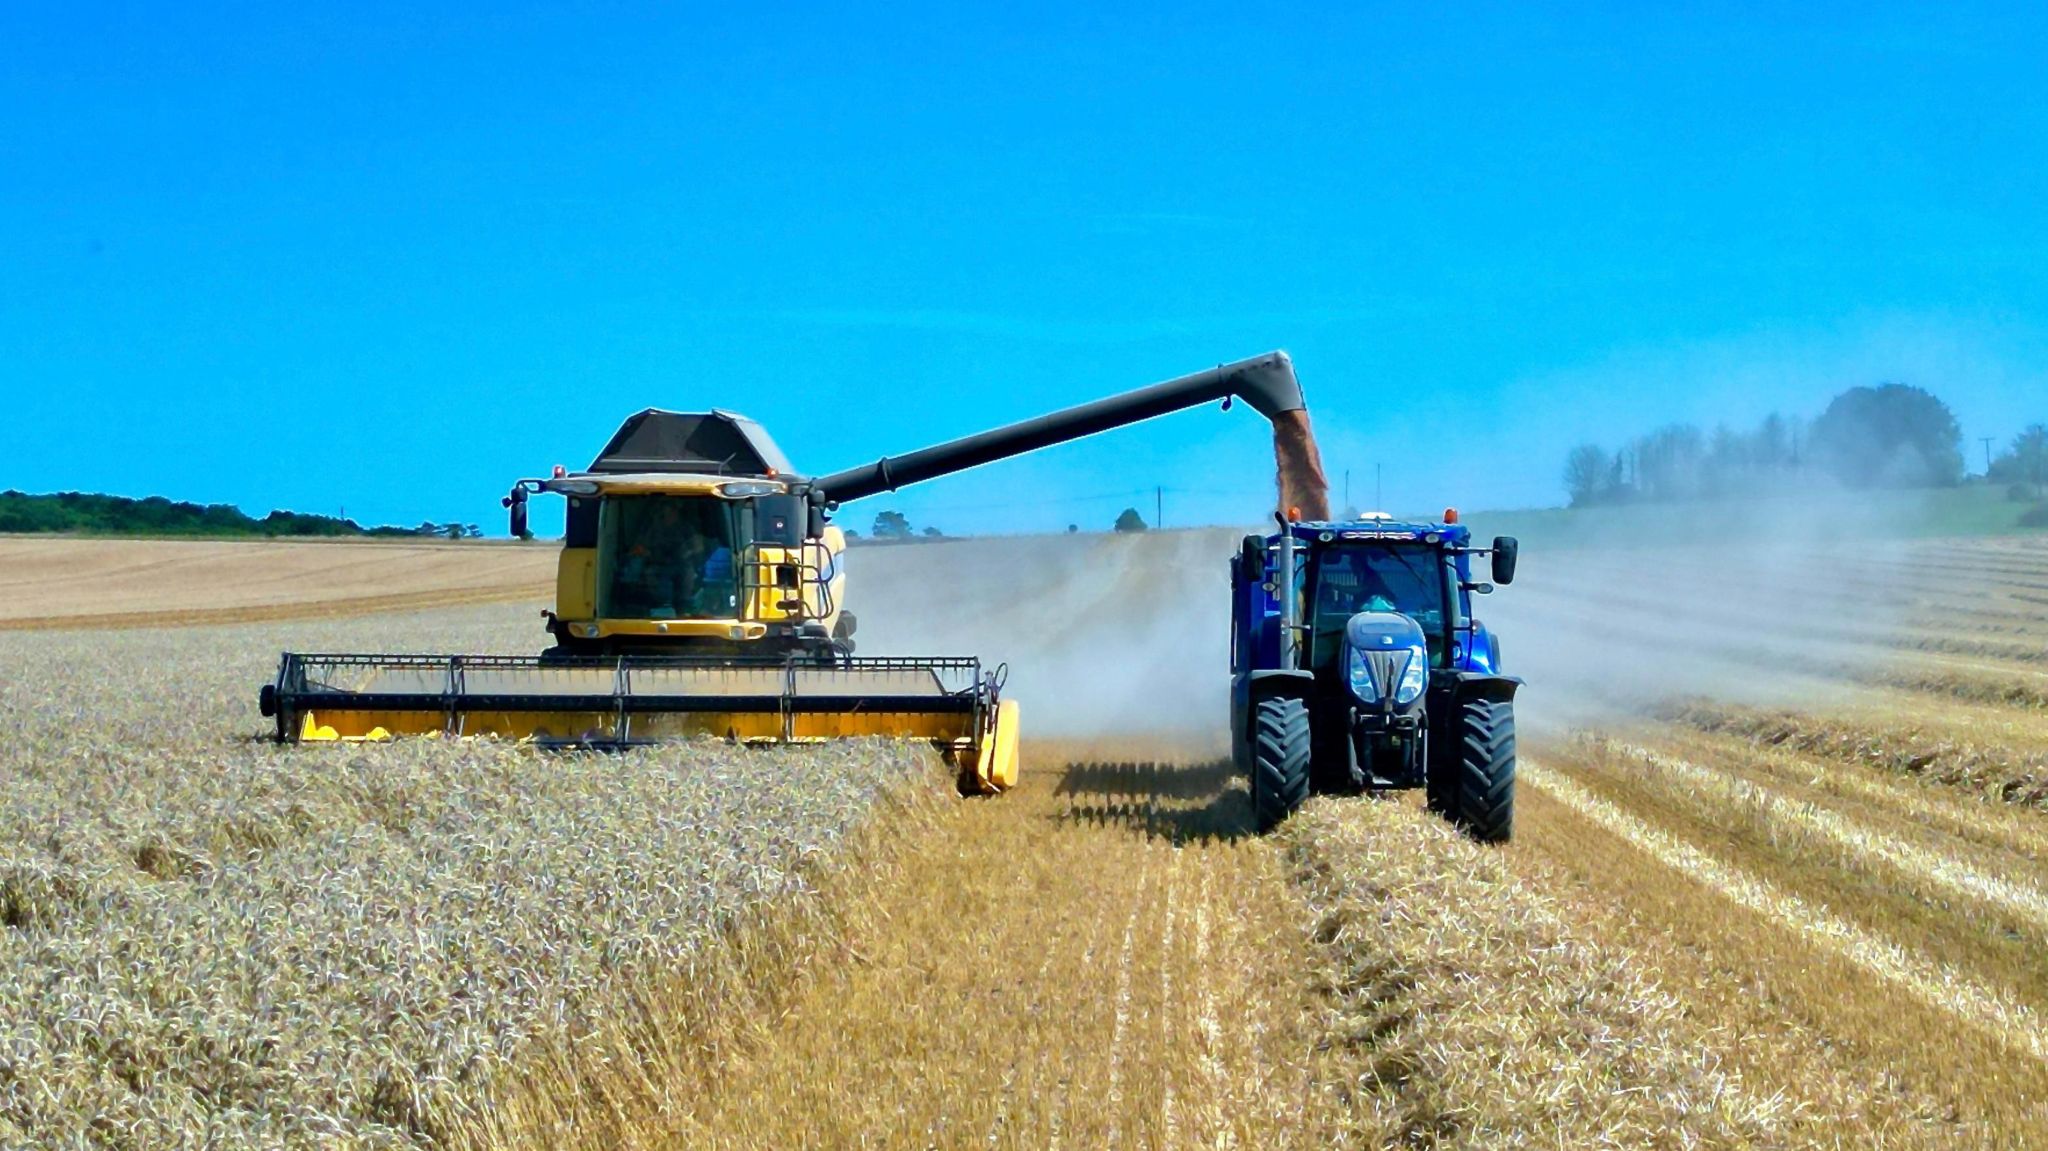 A combine harvester driving towards the camera. It is in a field of golden-coloured wheat. The sky is blue.